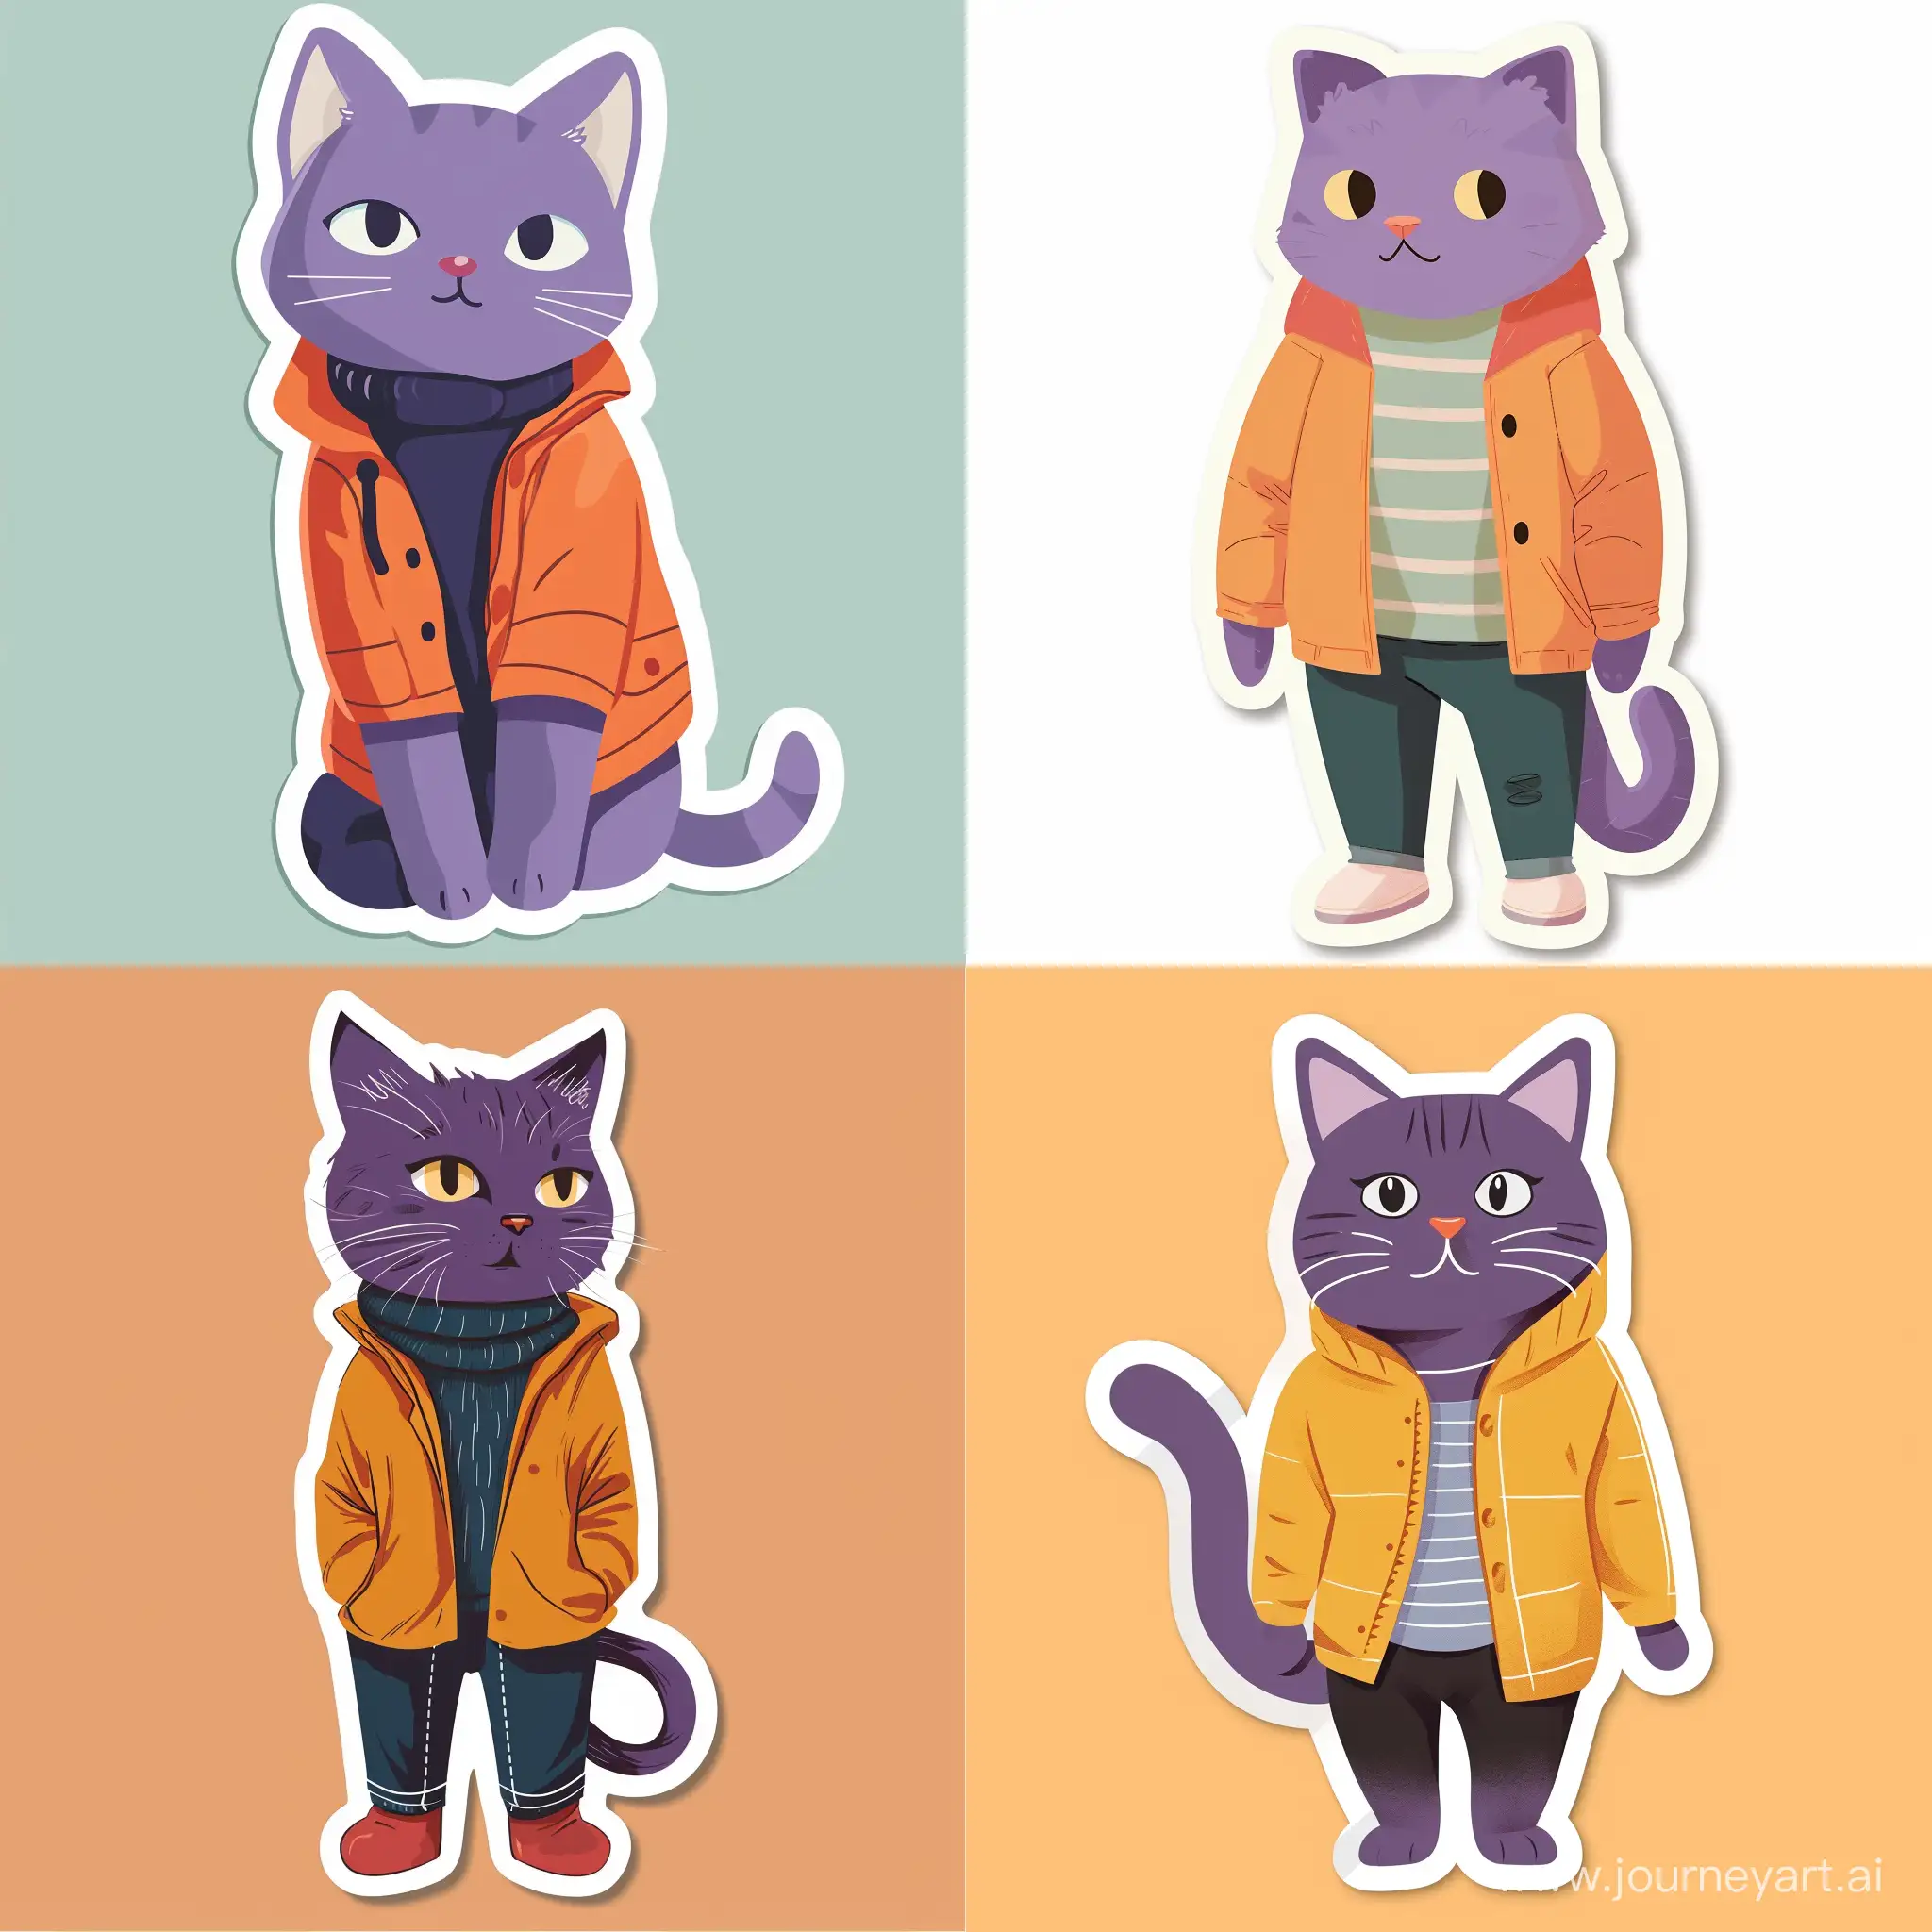 Charming-Purple-Cat-Sticker-with-Simple-Clothing-and-Ordinary-Pose